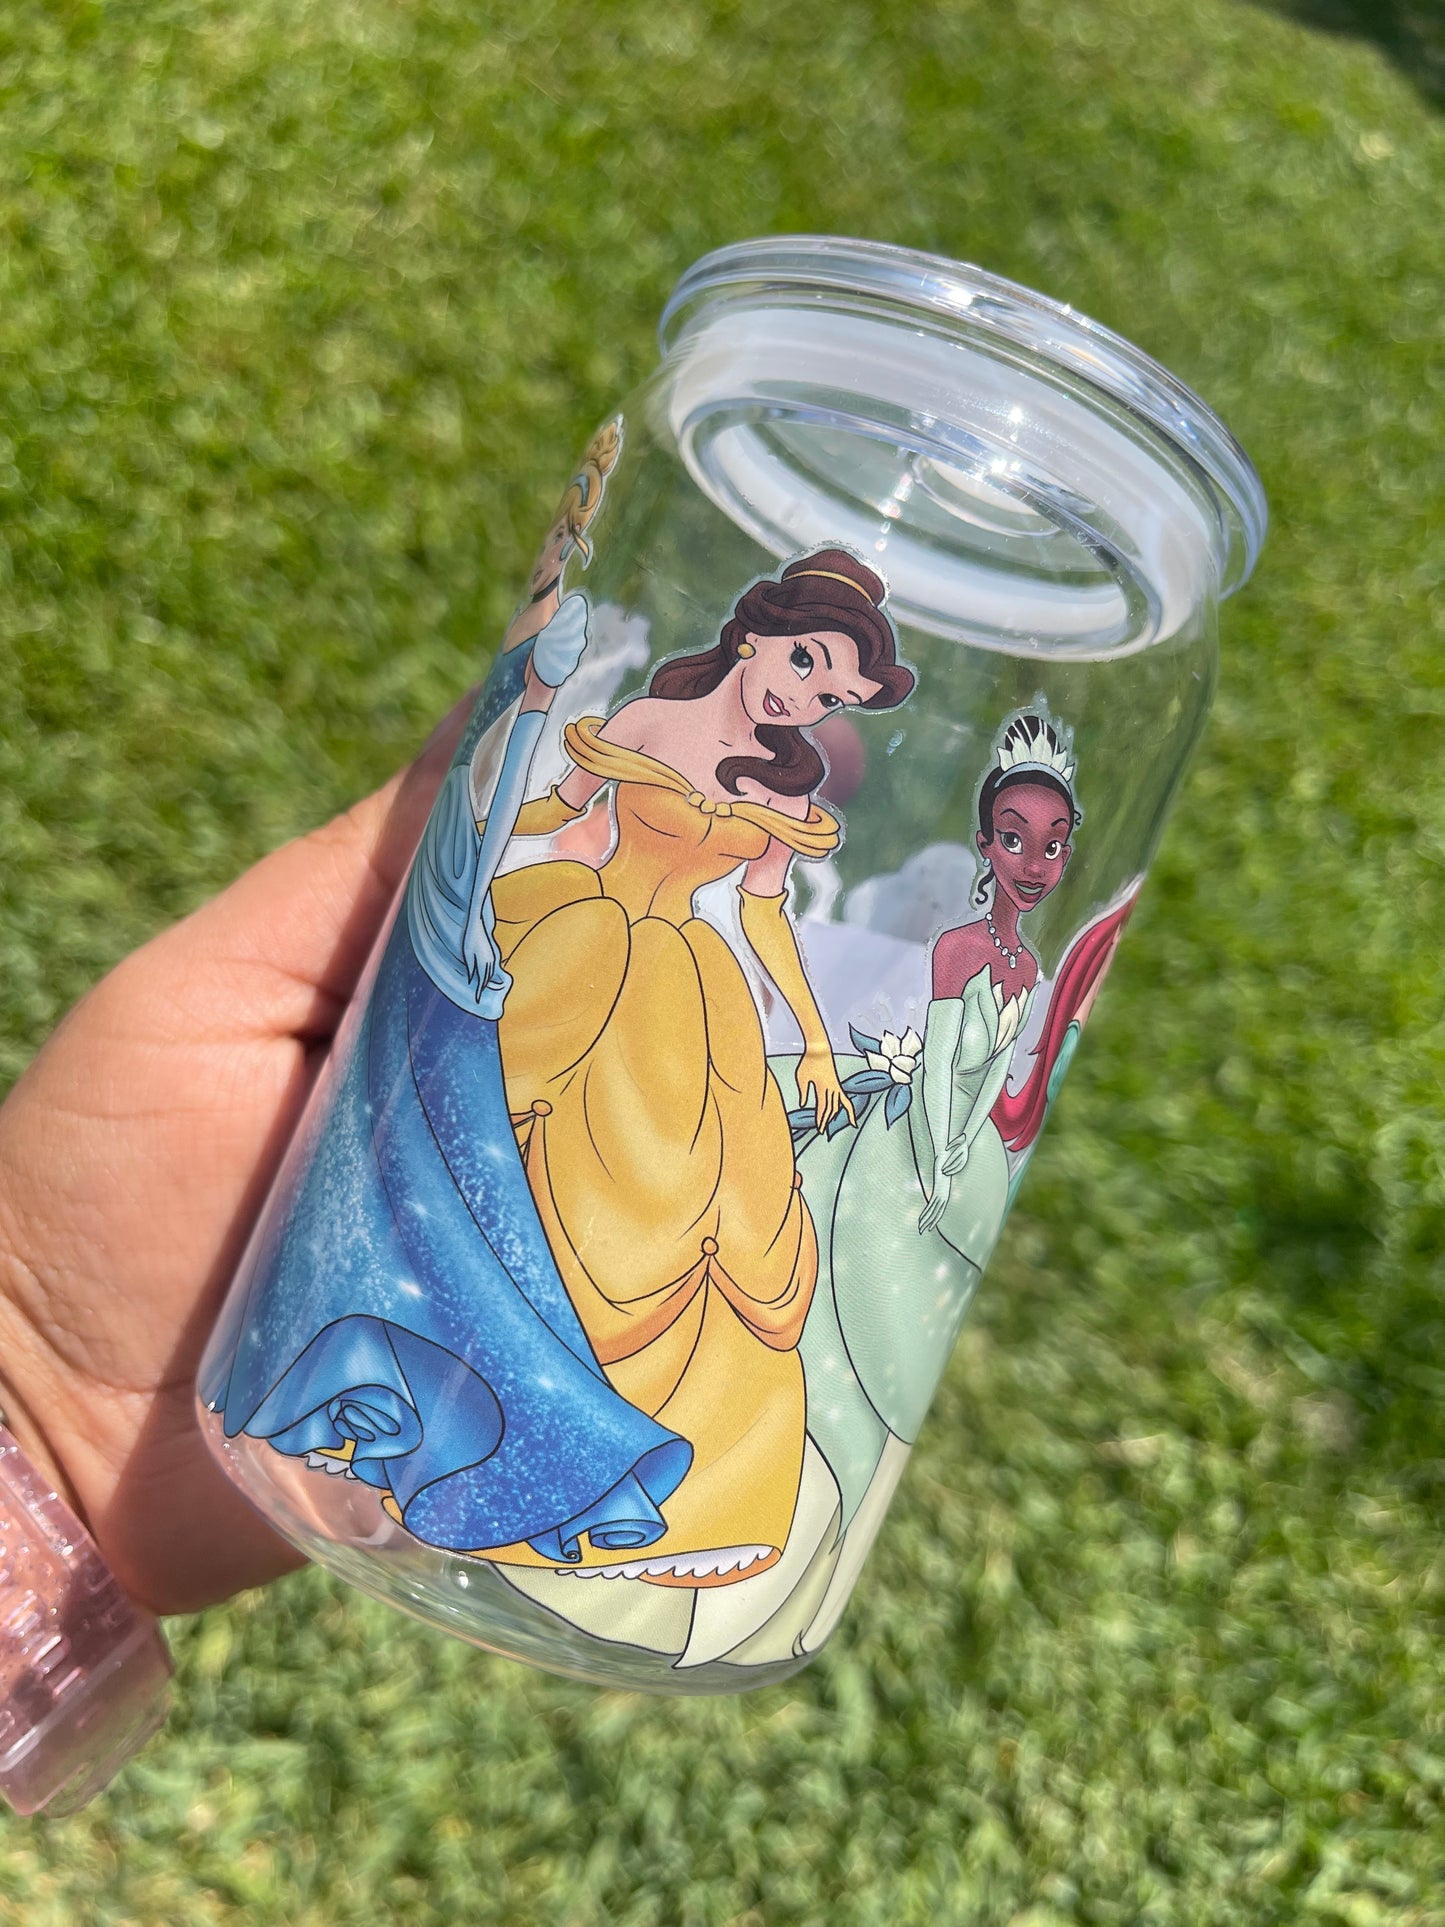 Character Plastic Can Cups